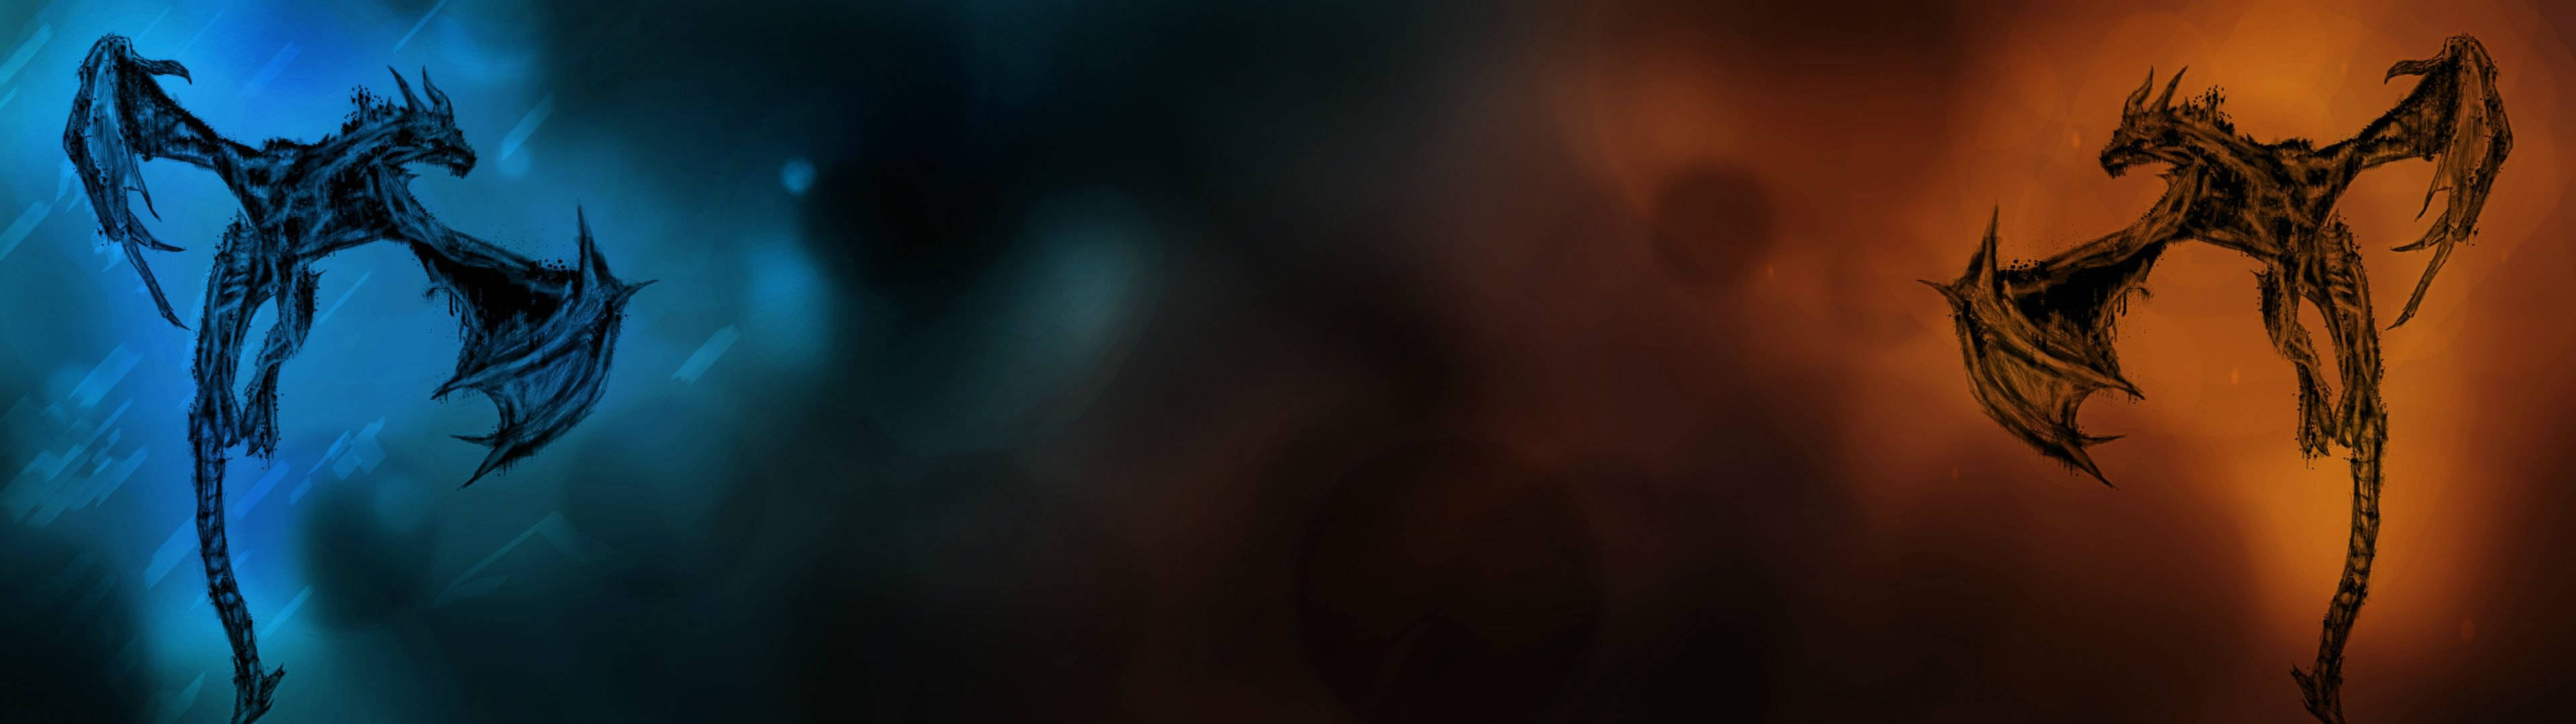 3840x1080 4k Two Dragons Background